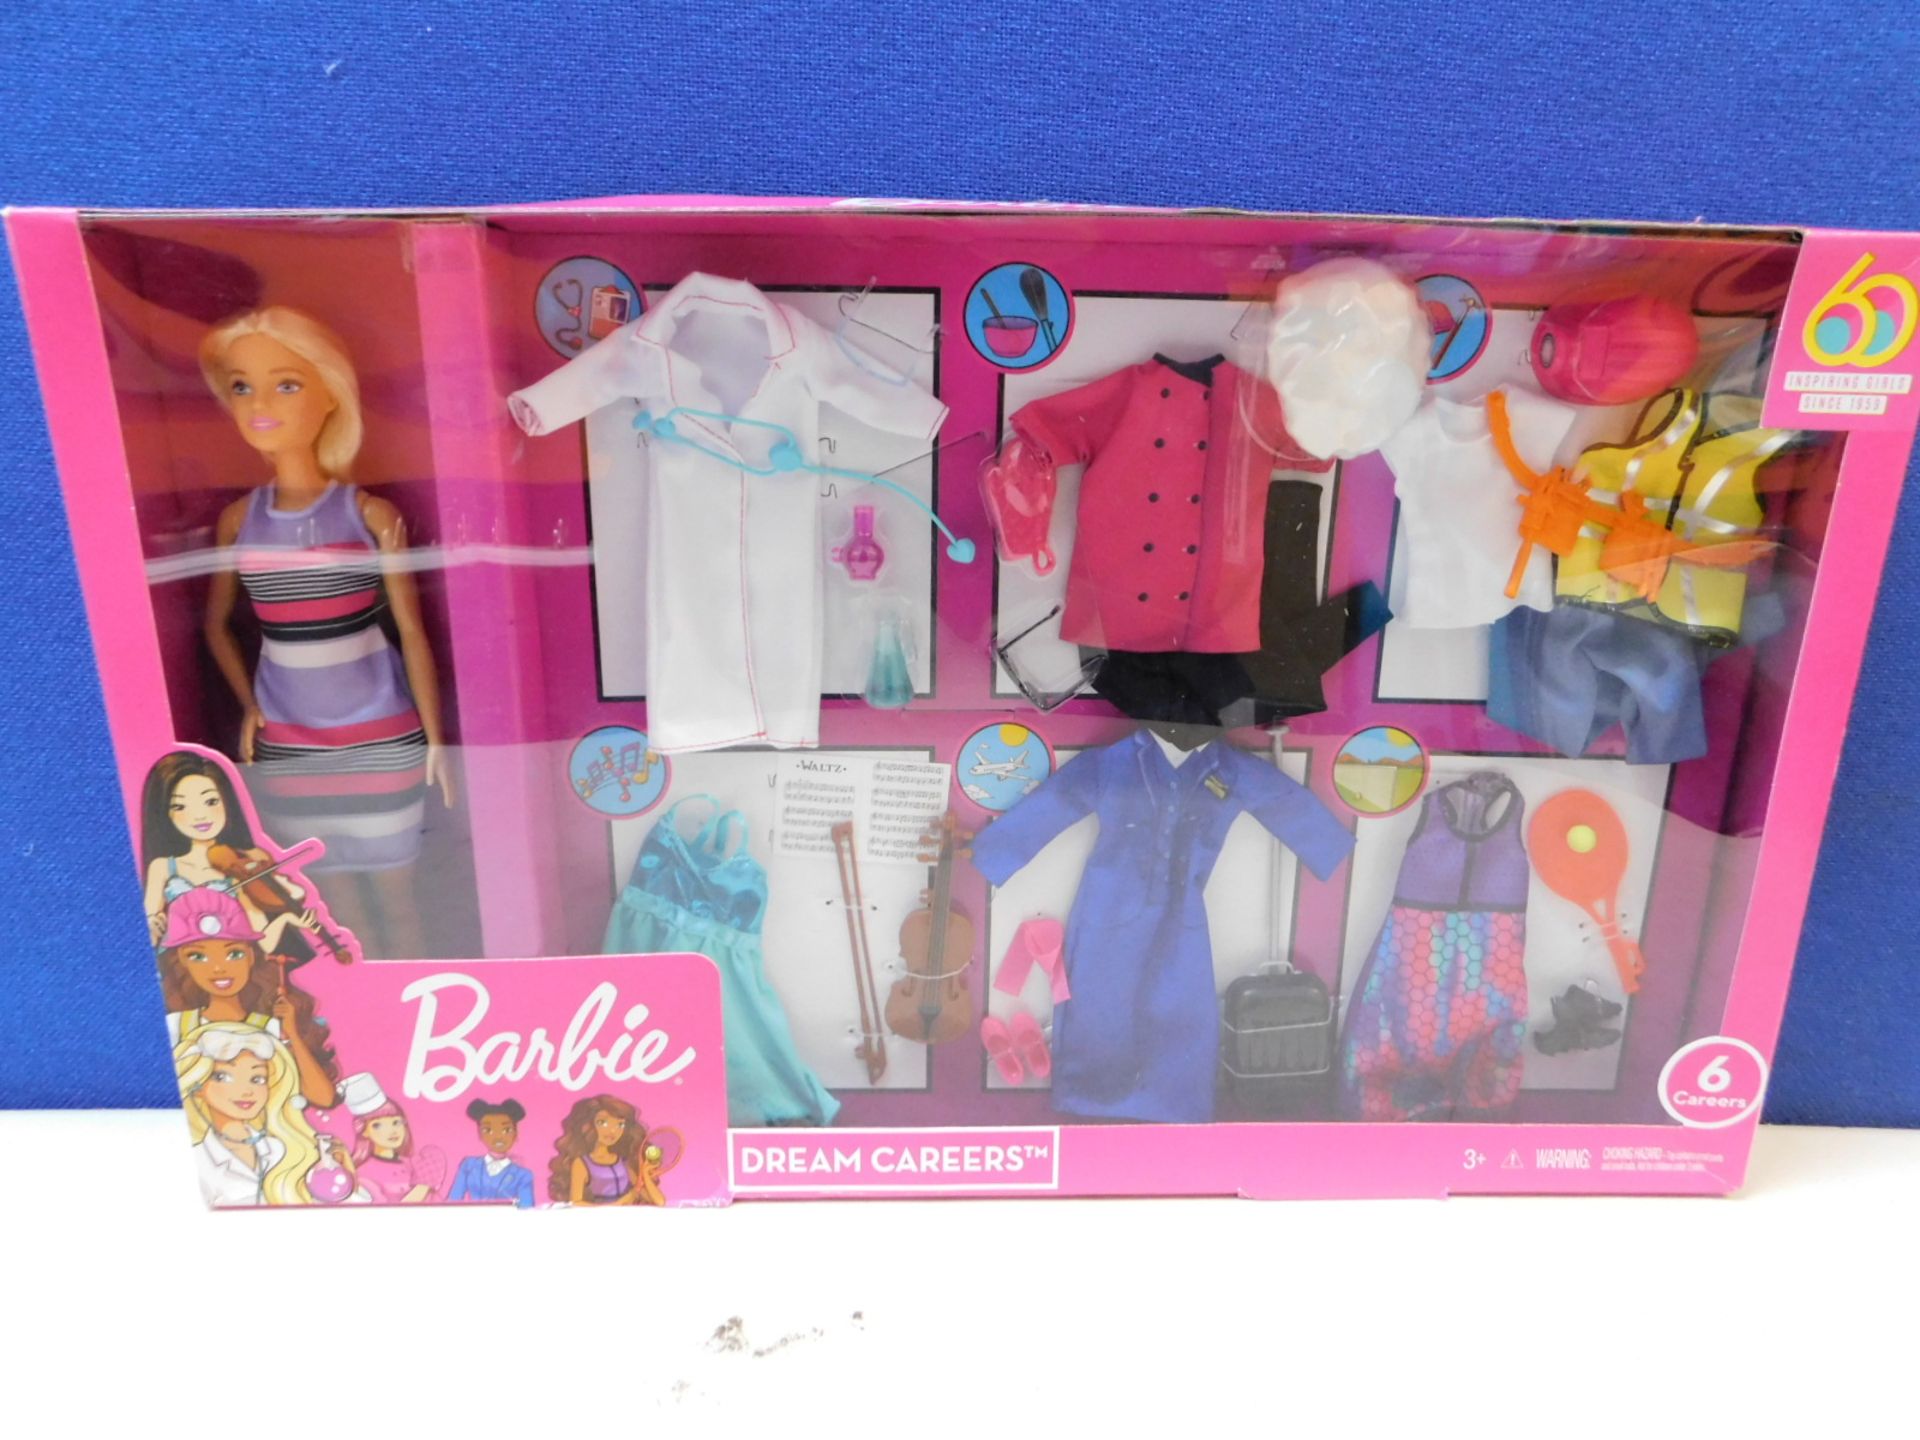 1 BOXED BARBIE DREAM CAREERS FASHION CLOSET DOLL DRESS UP SET WITH DOLL RRP Â£29.99